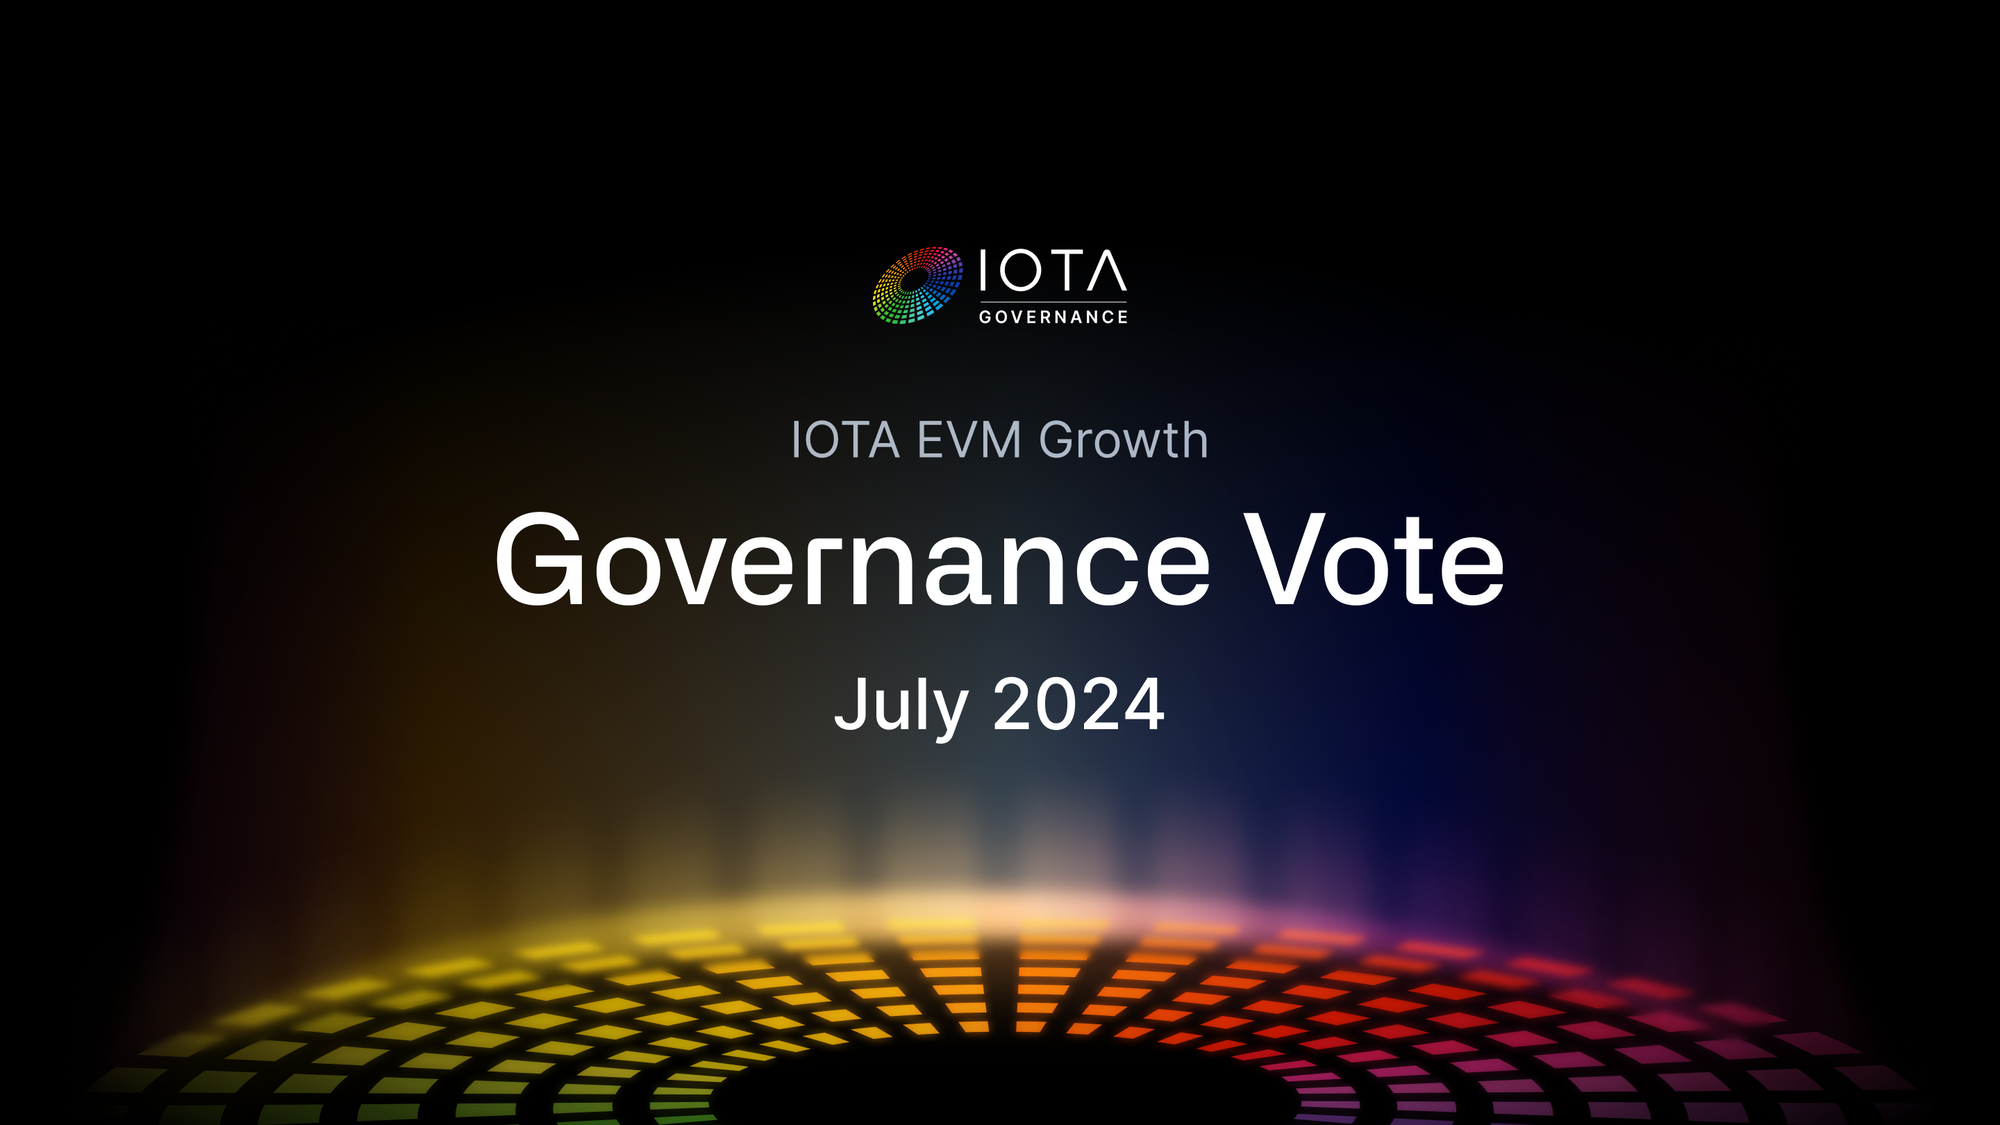 A Proposal for Supercharging IOTA EVM Growth